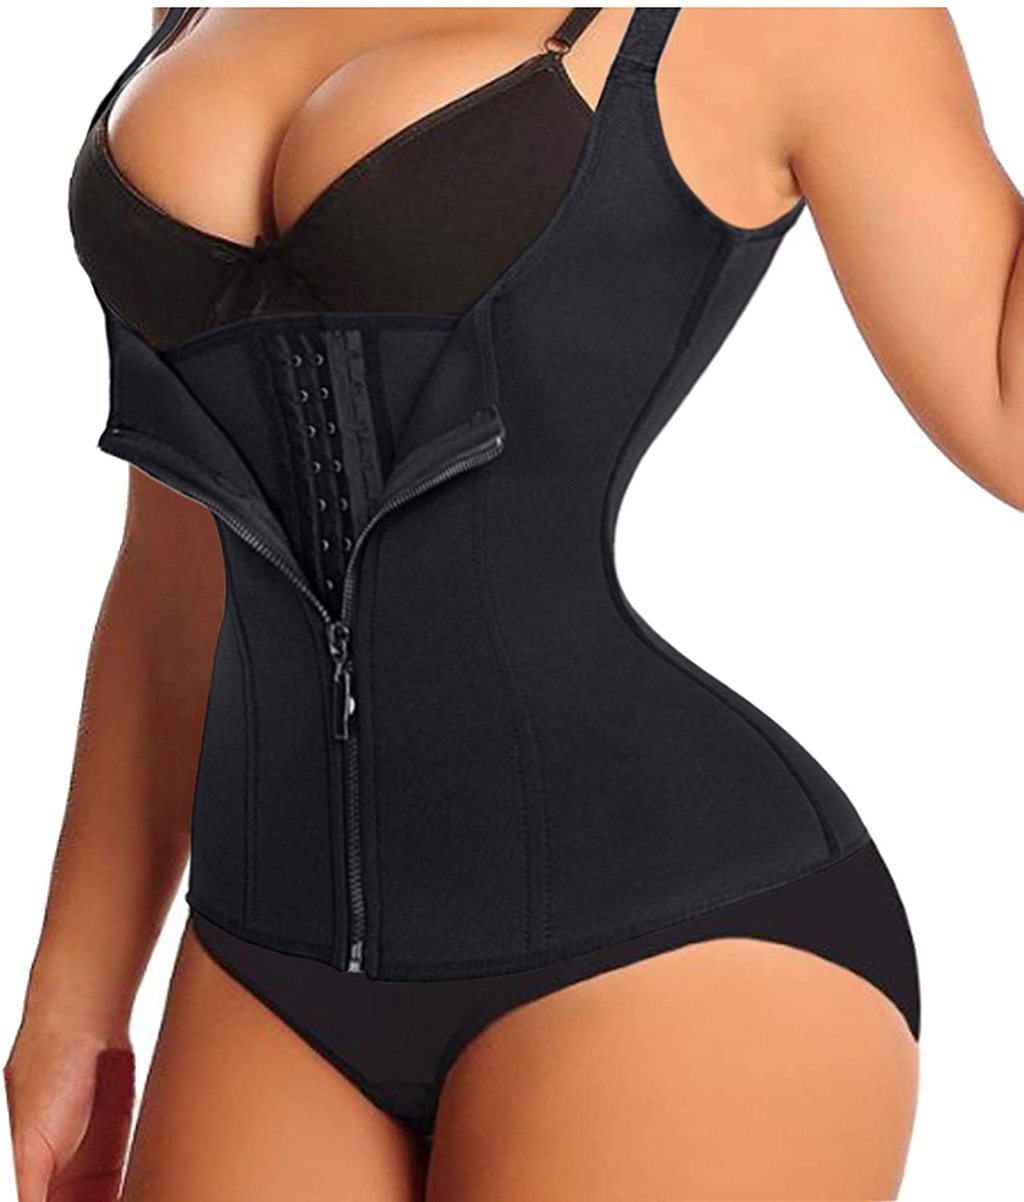 types of waist trainers